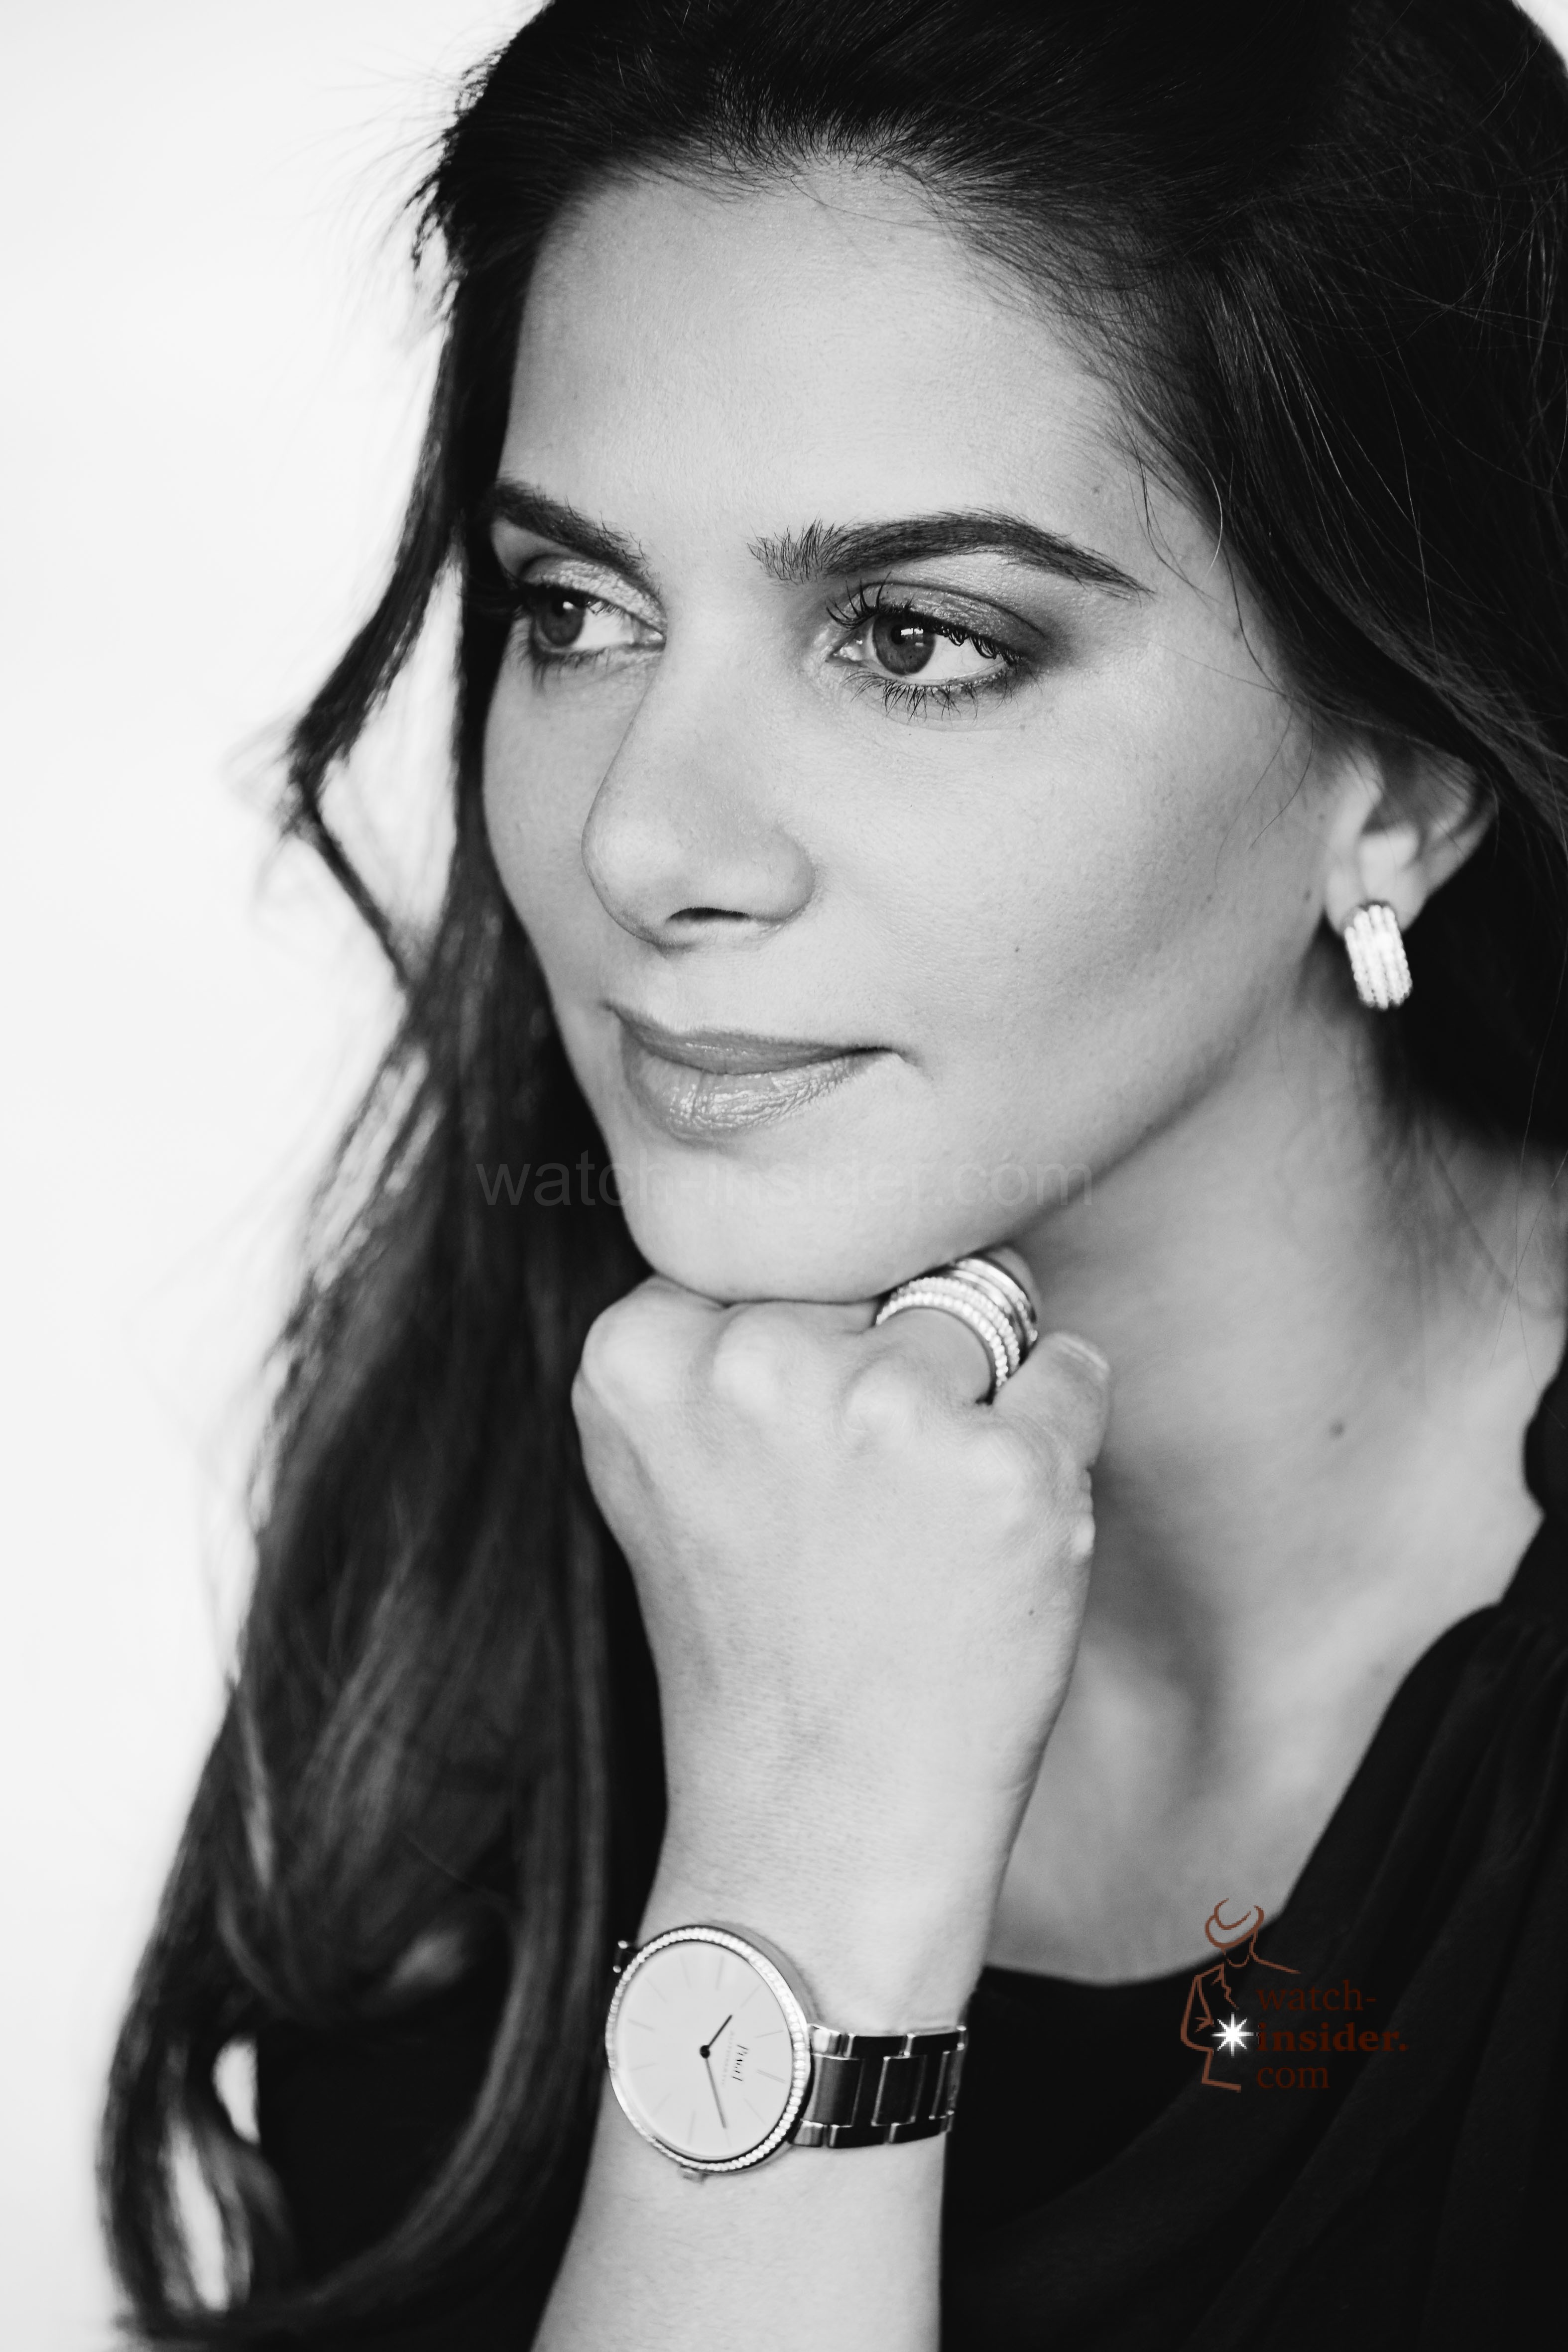 Today Ms Chabi Nouri was officially announced to be the next CEO of Piaget.